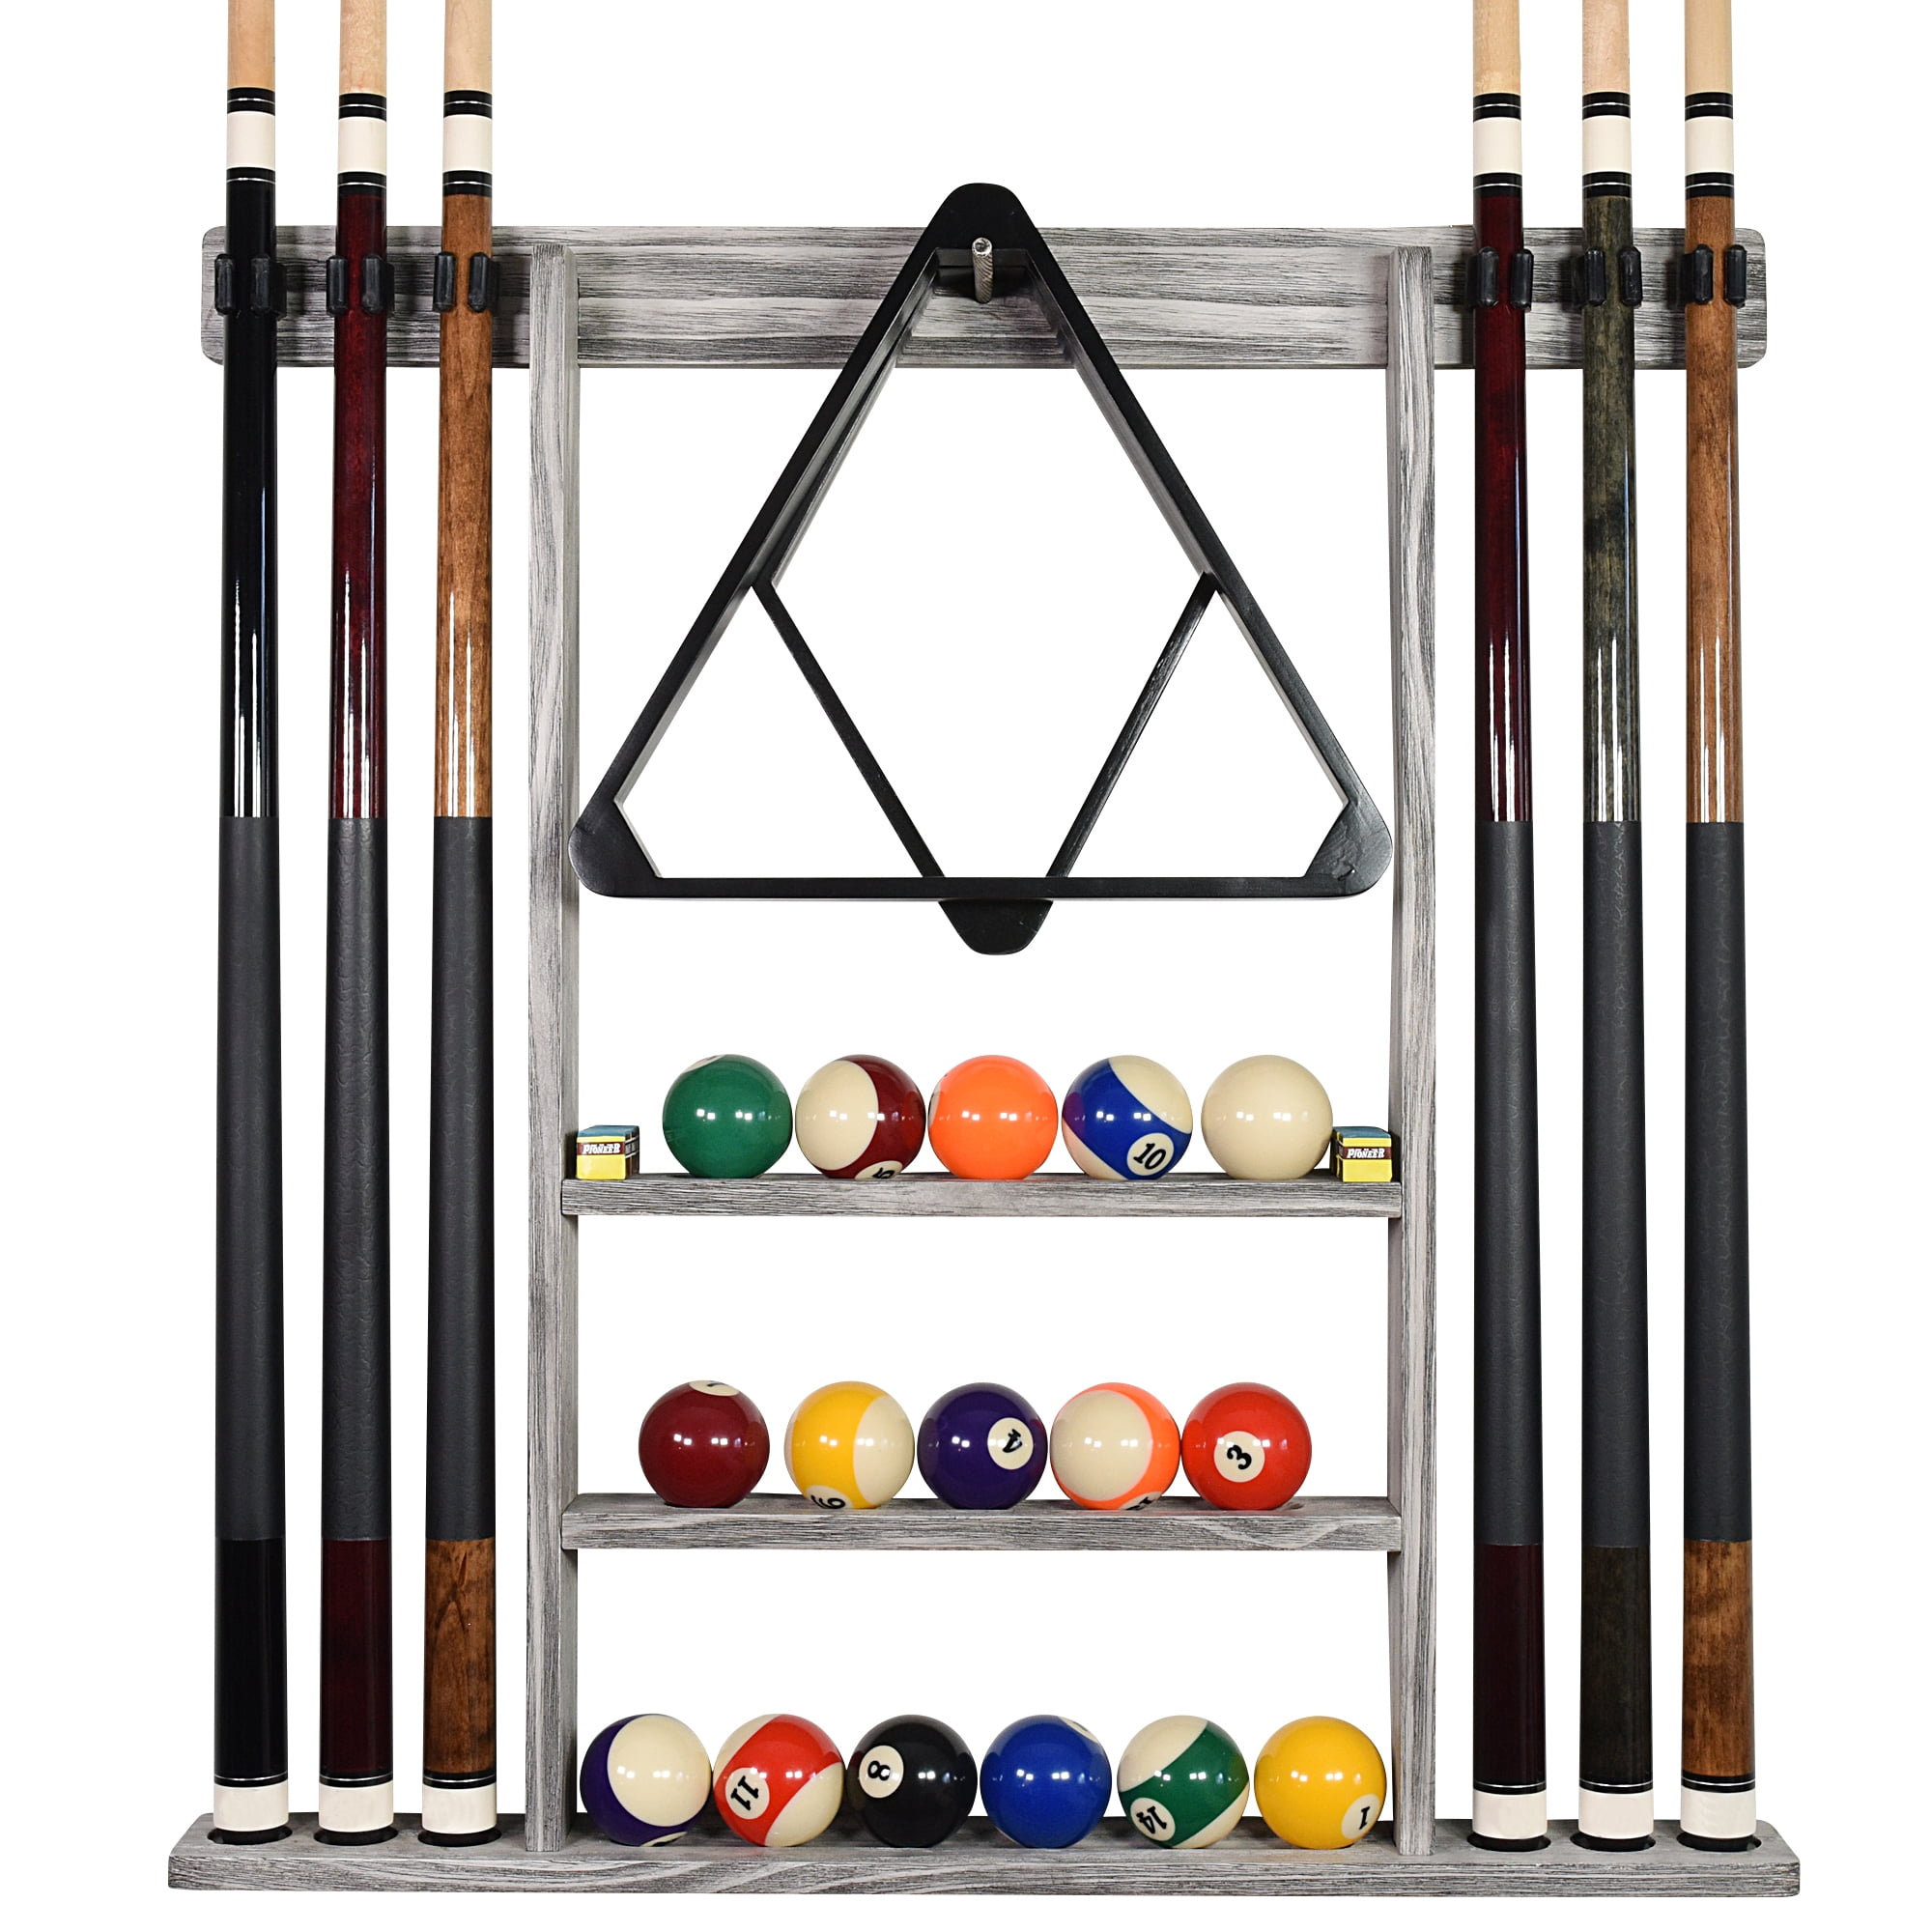 DURABLE POOL/ SNOOKER CUE RACK HOLDS 6 CUES BILLIARD RODS PLASTIC RUBBER 